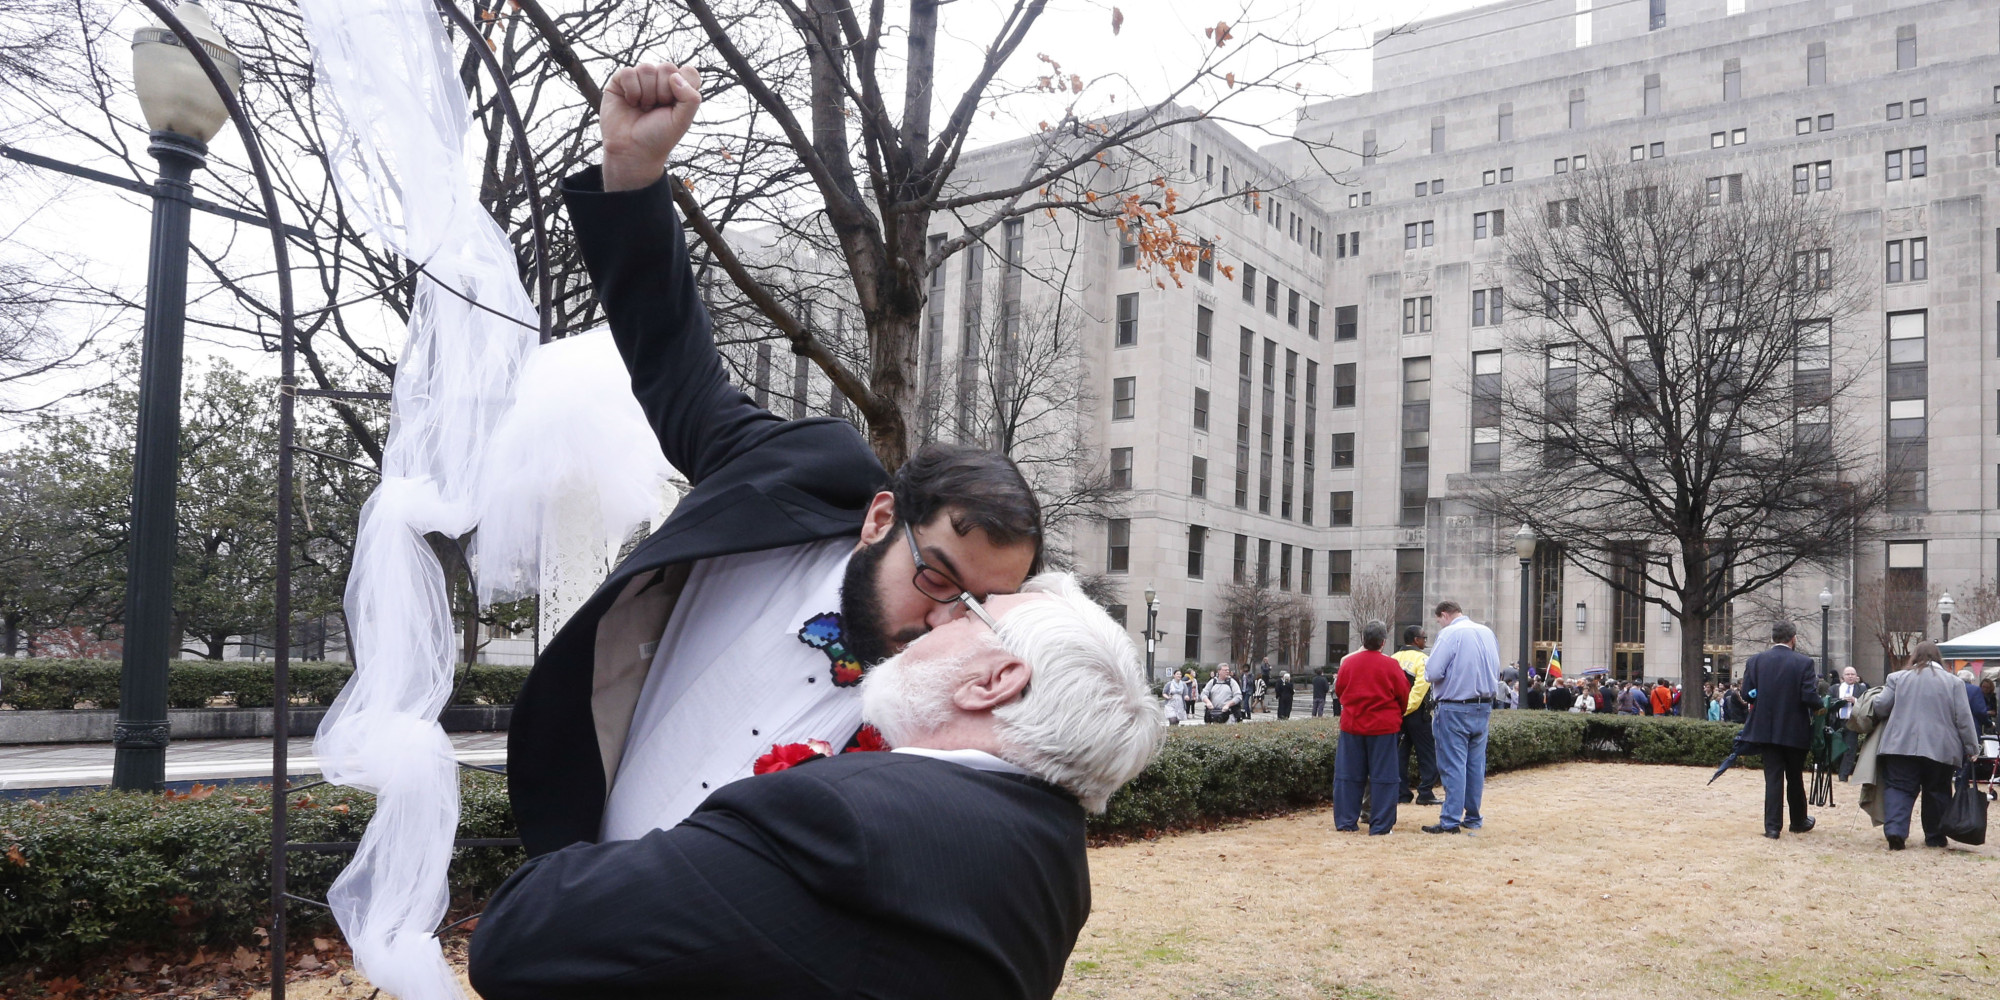 Majority Of Alabama Counties Now Issuing Marriage Licenses To Same Sex